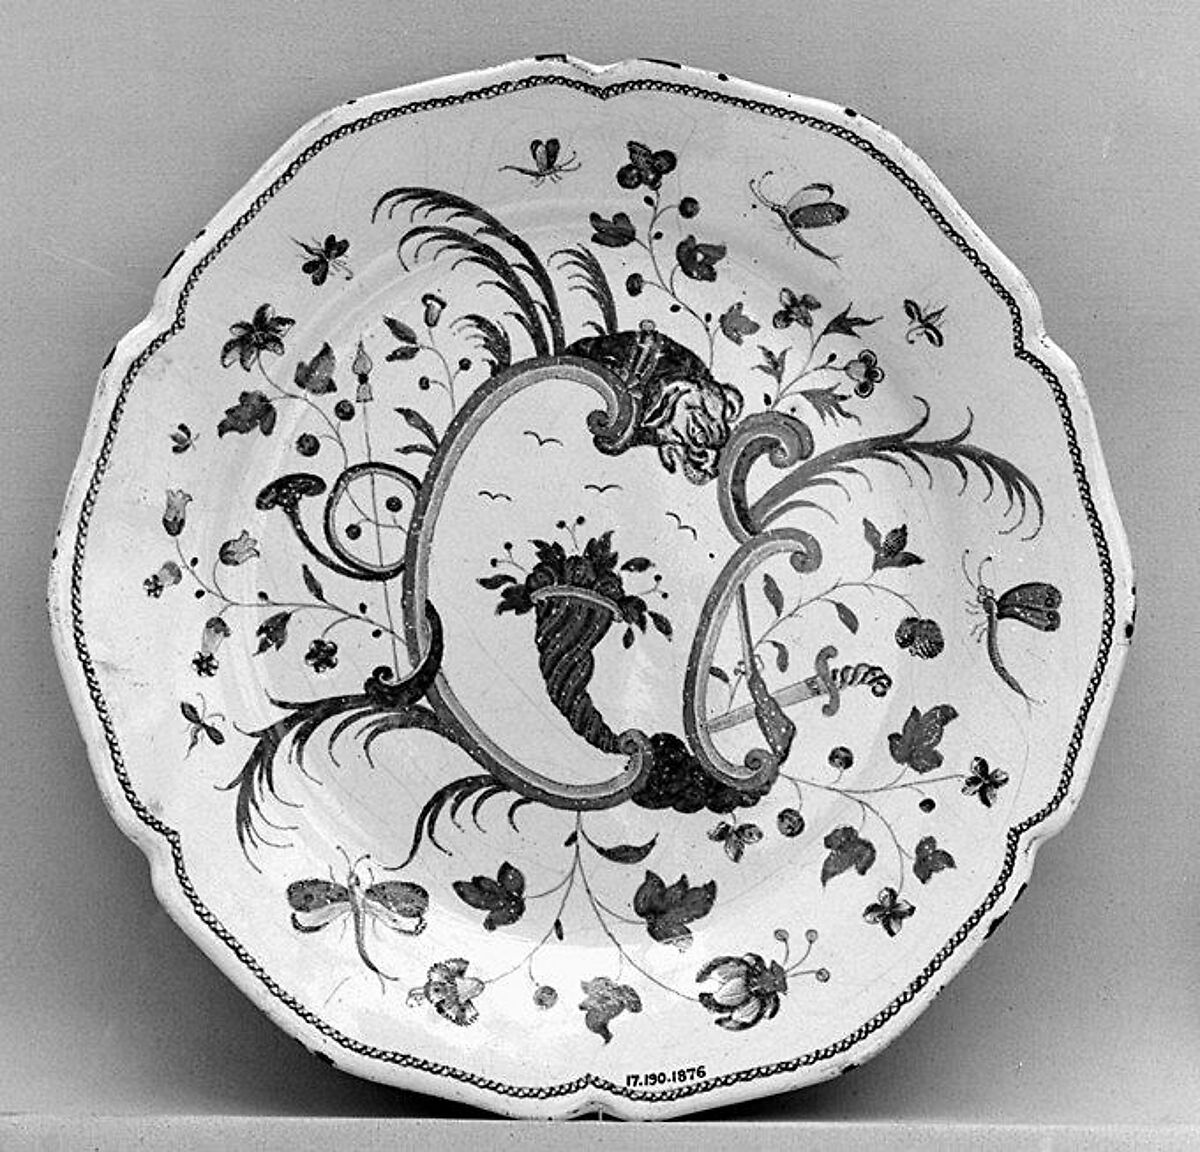 Plate, Pierre Chapelle II (1684–1760), Faience (tin-glazed earthenware), French, Rouen or Sinceny 